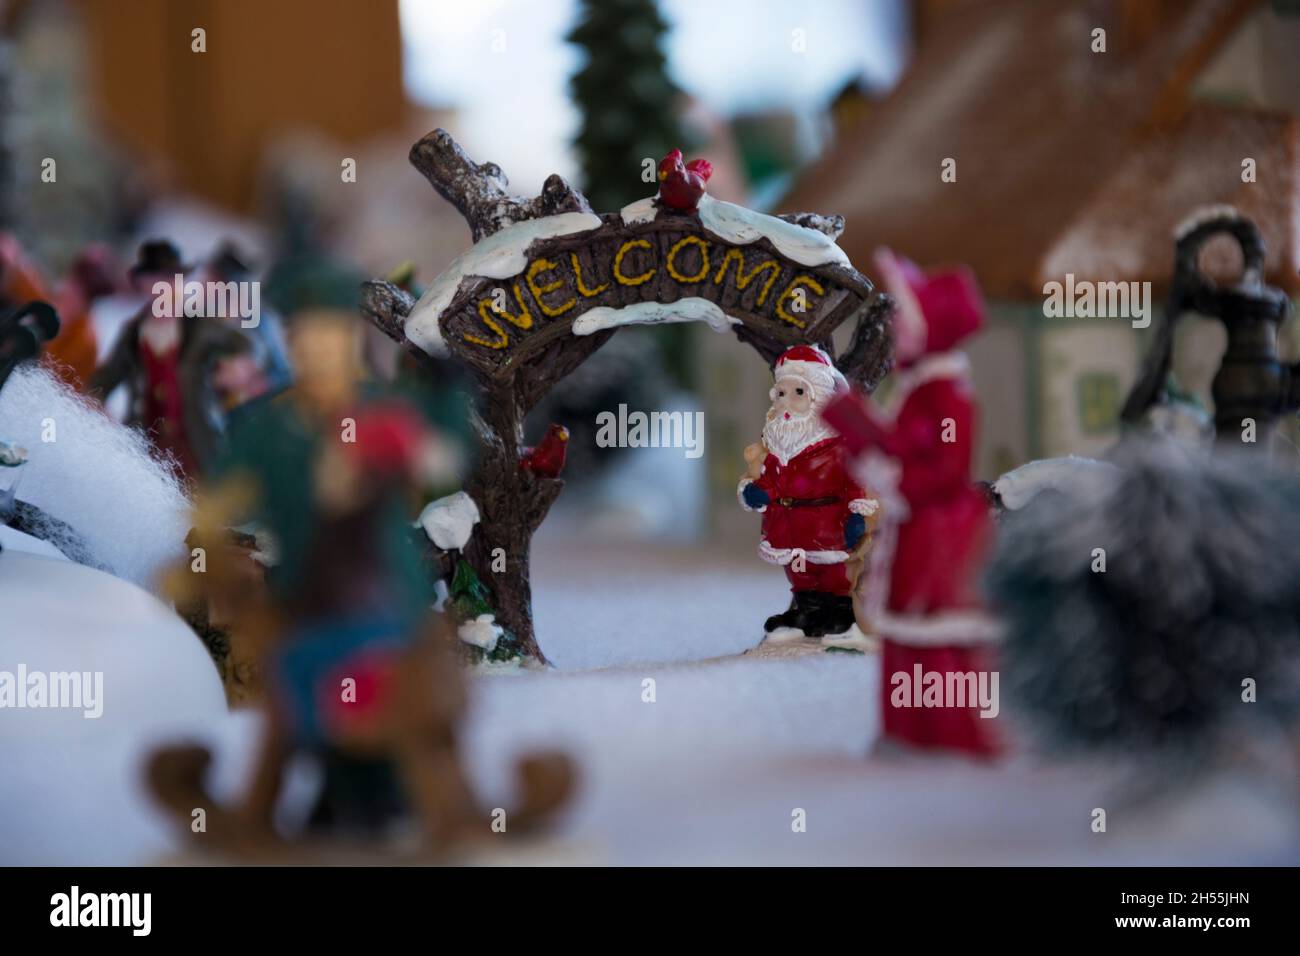 Santa Claus welcome sign on the Christmas village entrance portal Stock Photo